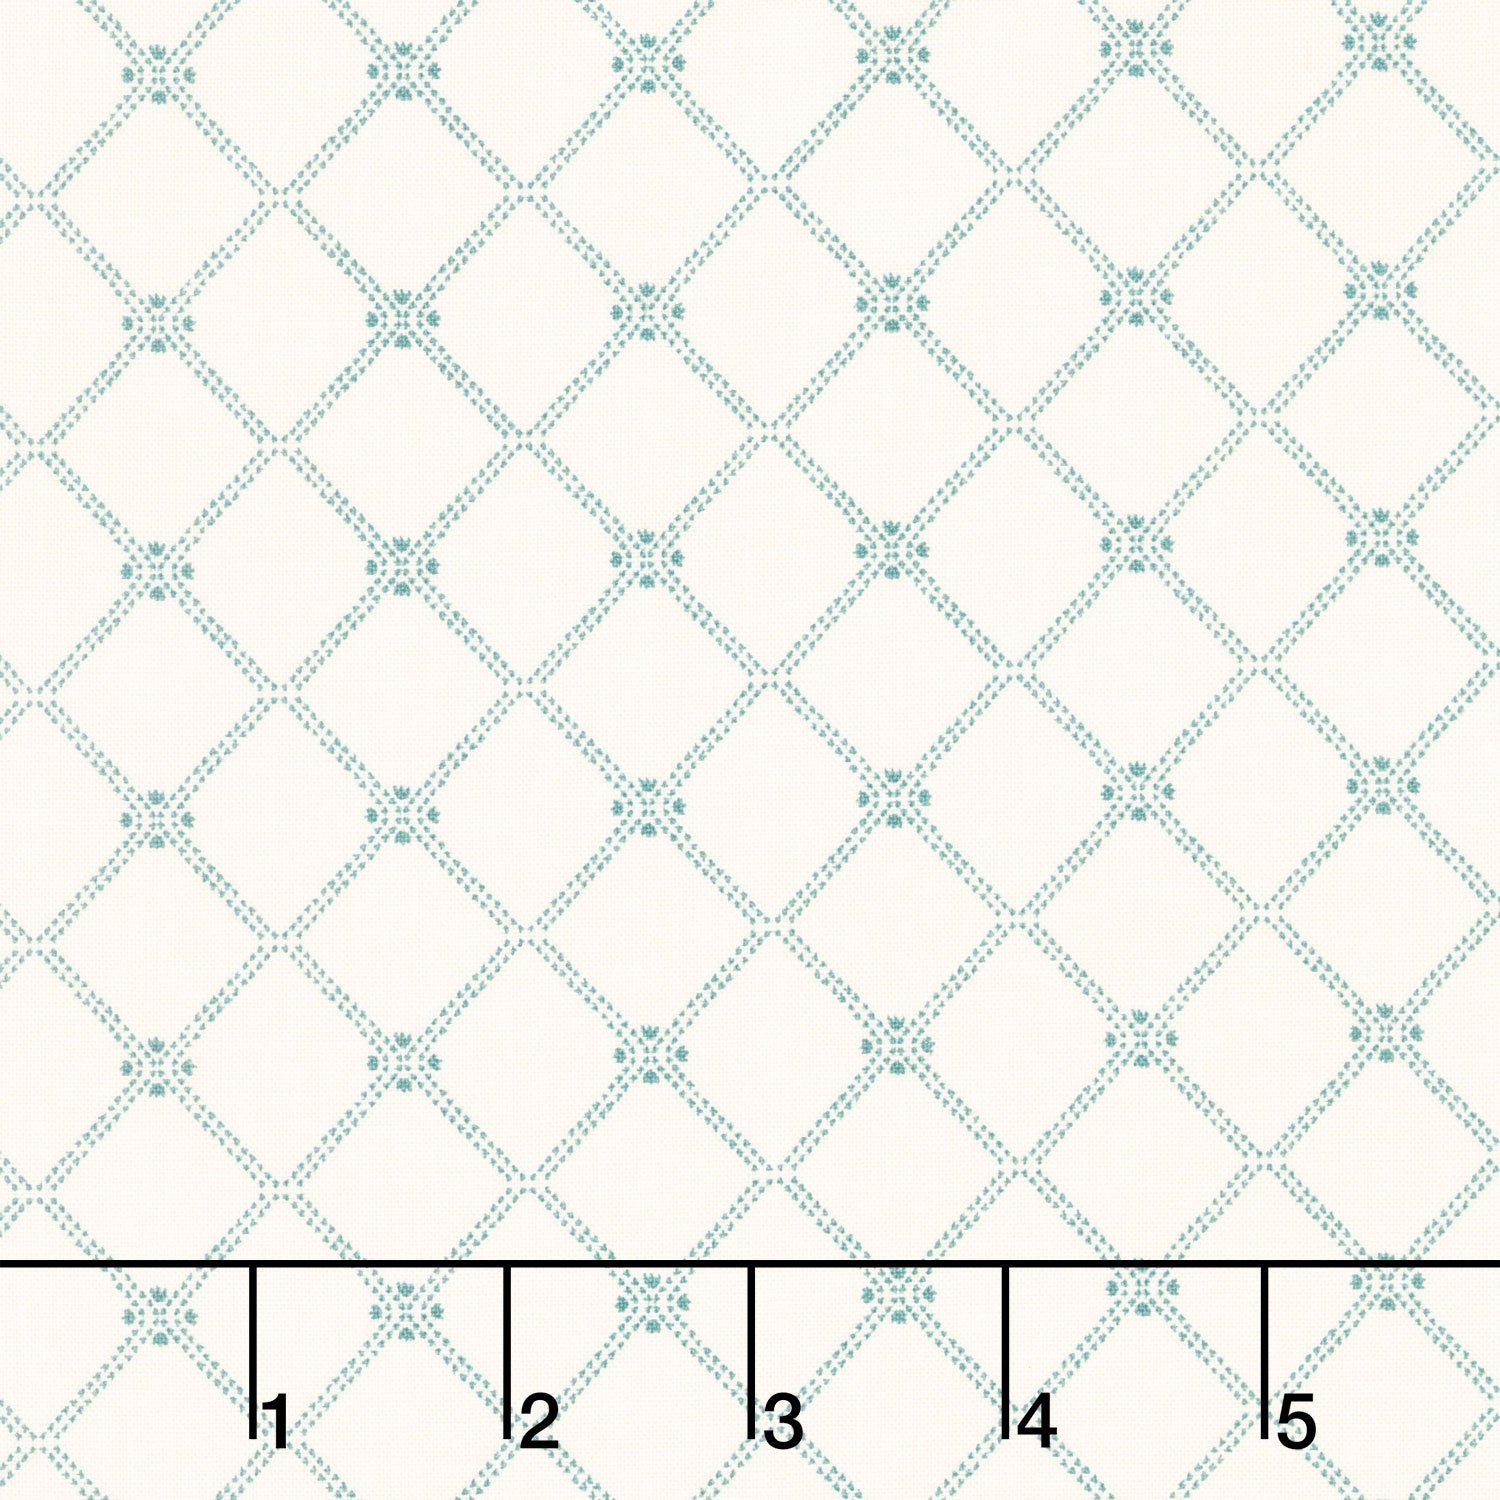 The Quilting Shed - Loving this diagonal seam tape so much! It's